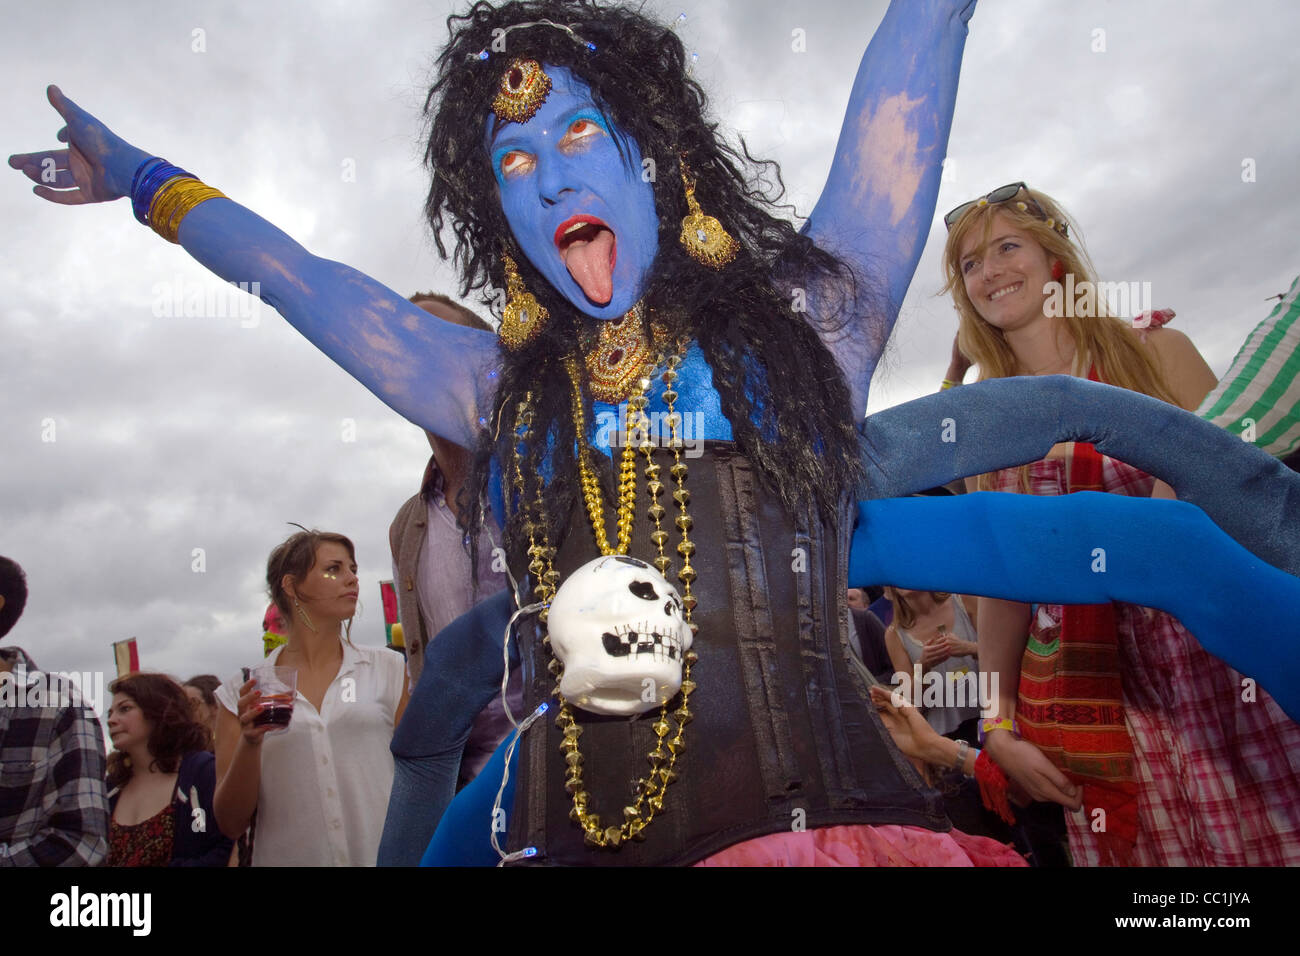 A woman dressed as the Indian Goddess Kali with blue body paint cheers in  the audience at the Standon Calling Festival Stock Photo - Alamy